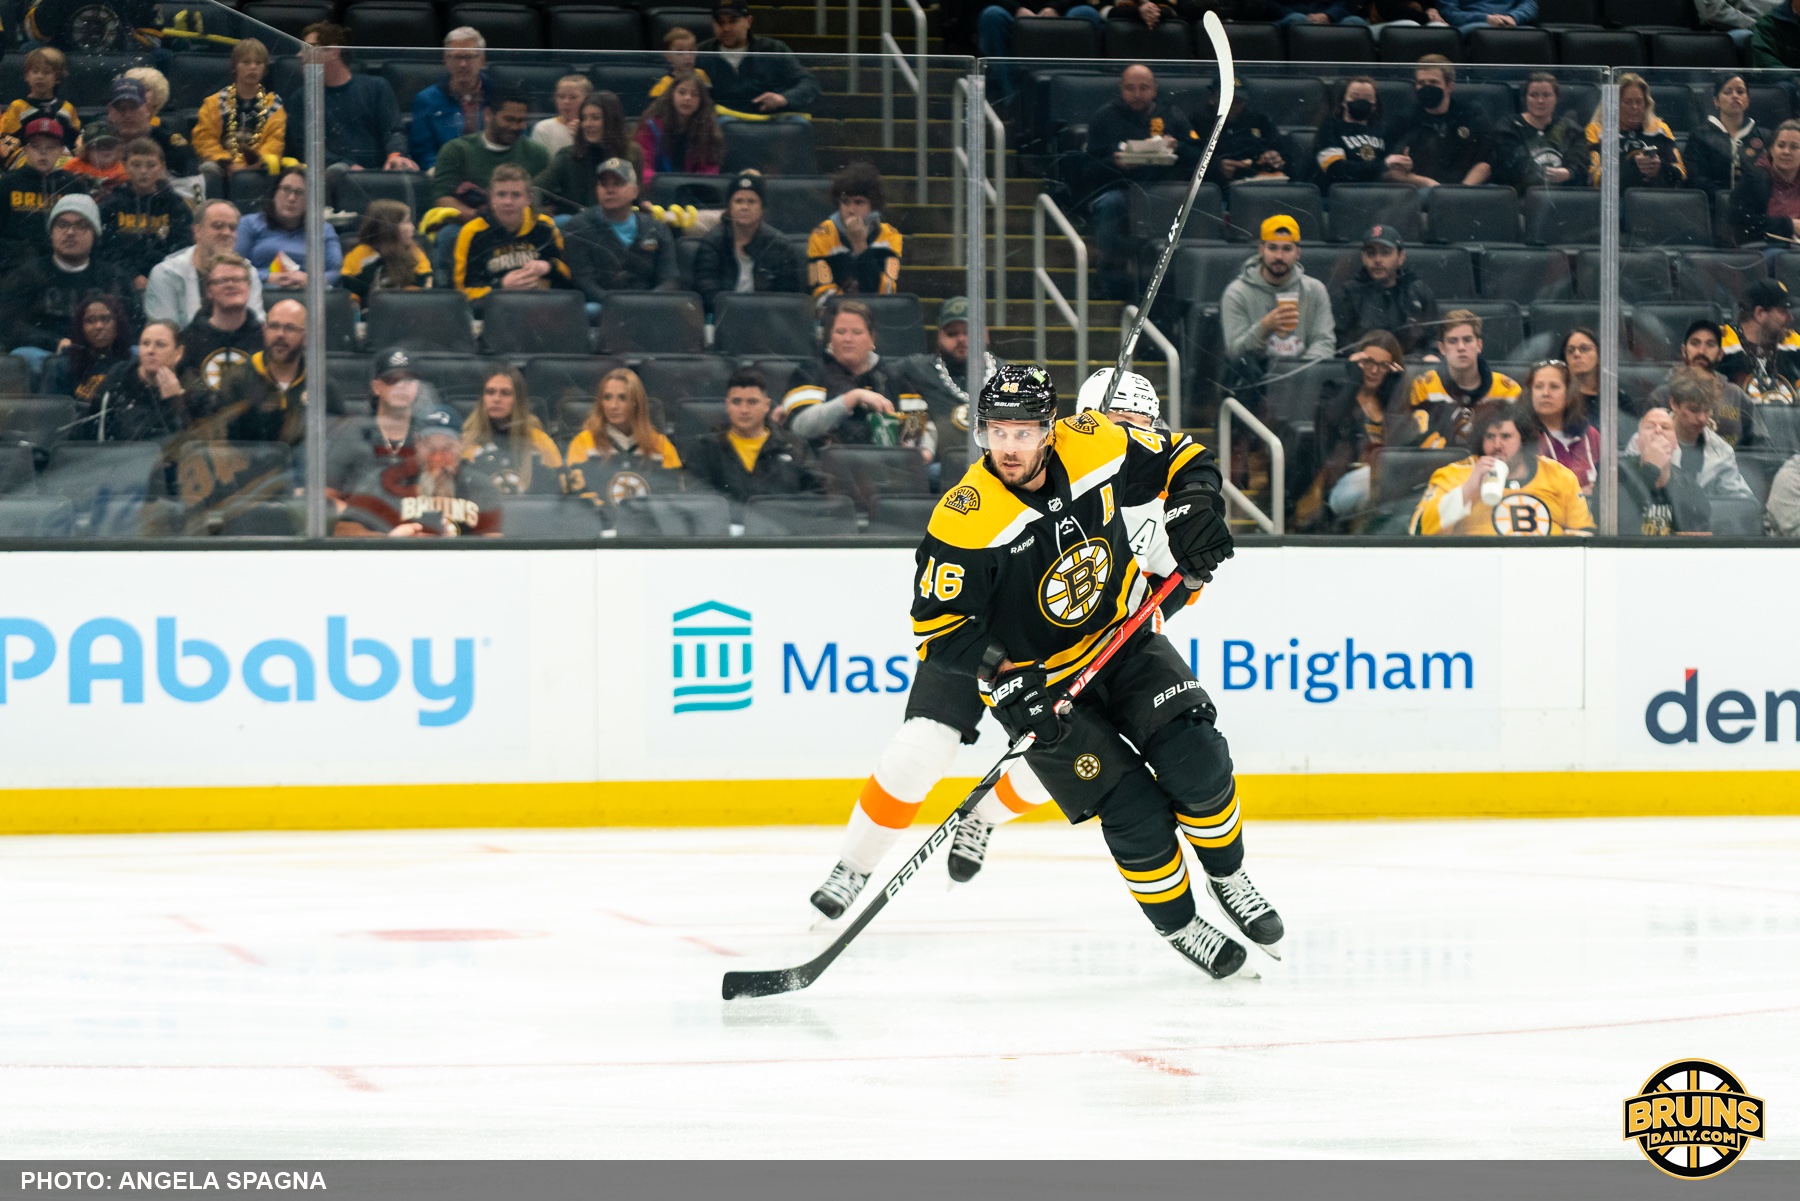 David Krejci returned to Bruins to make another Cup push with Bergeron,  Pastrnak - CBS Boston